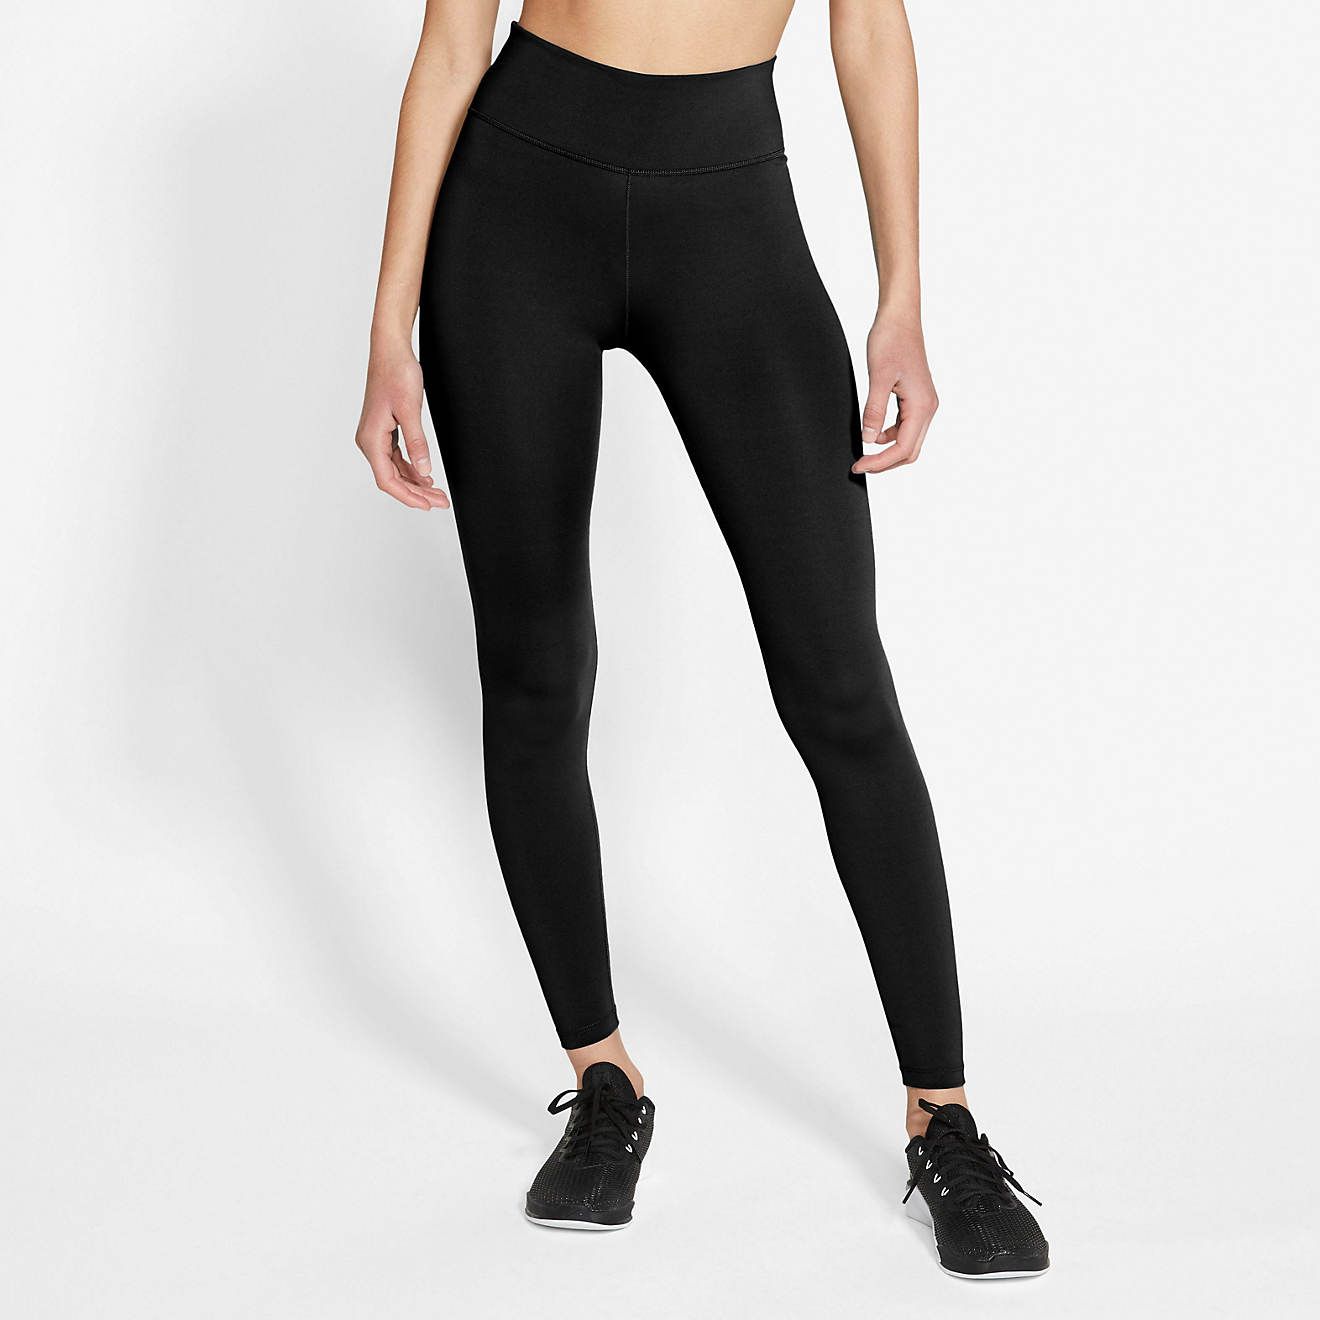 Nike Women's One Mid Rise 2.0 Tights | Academy | Academy Sports + Outdoor Affiliate